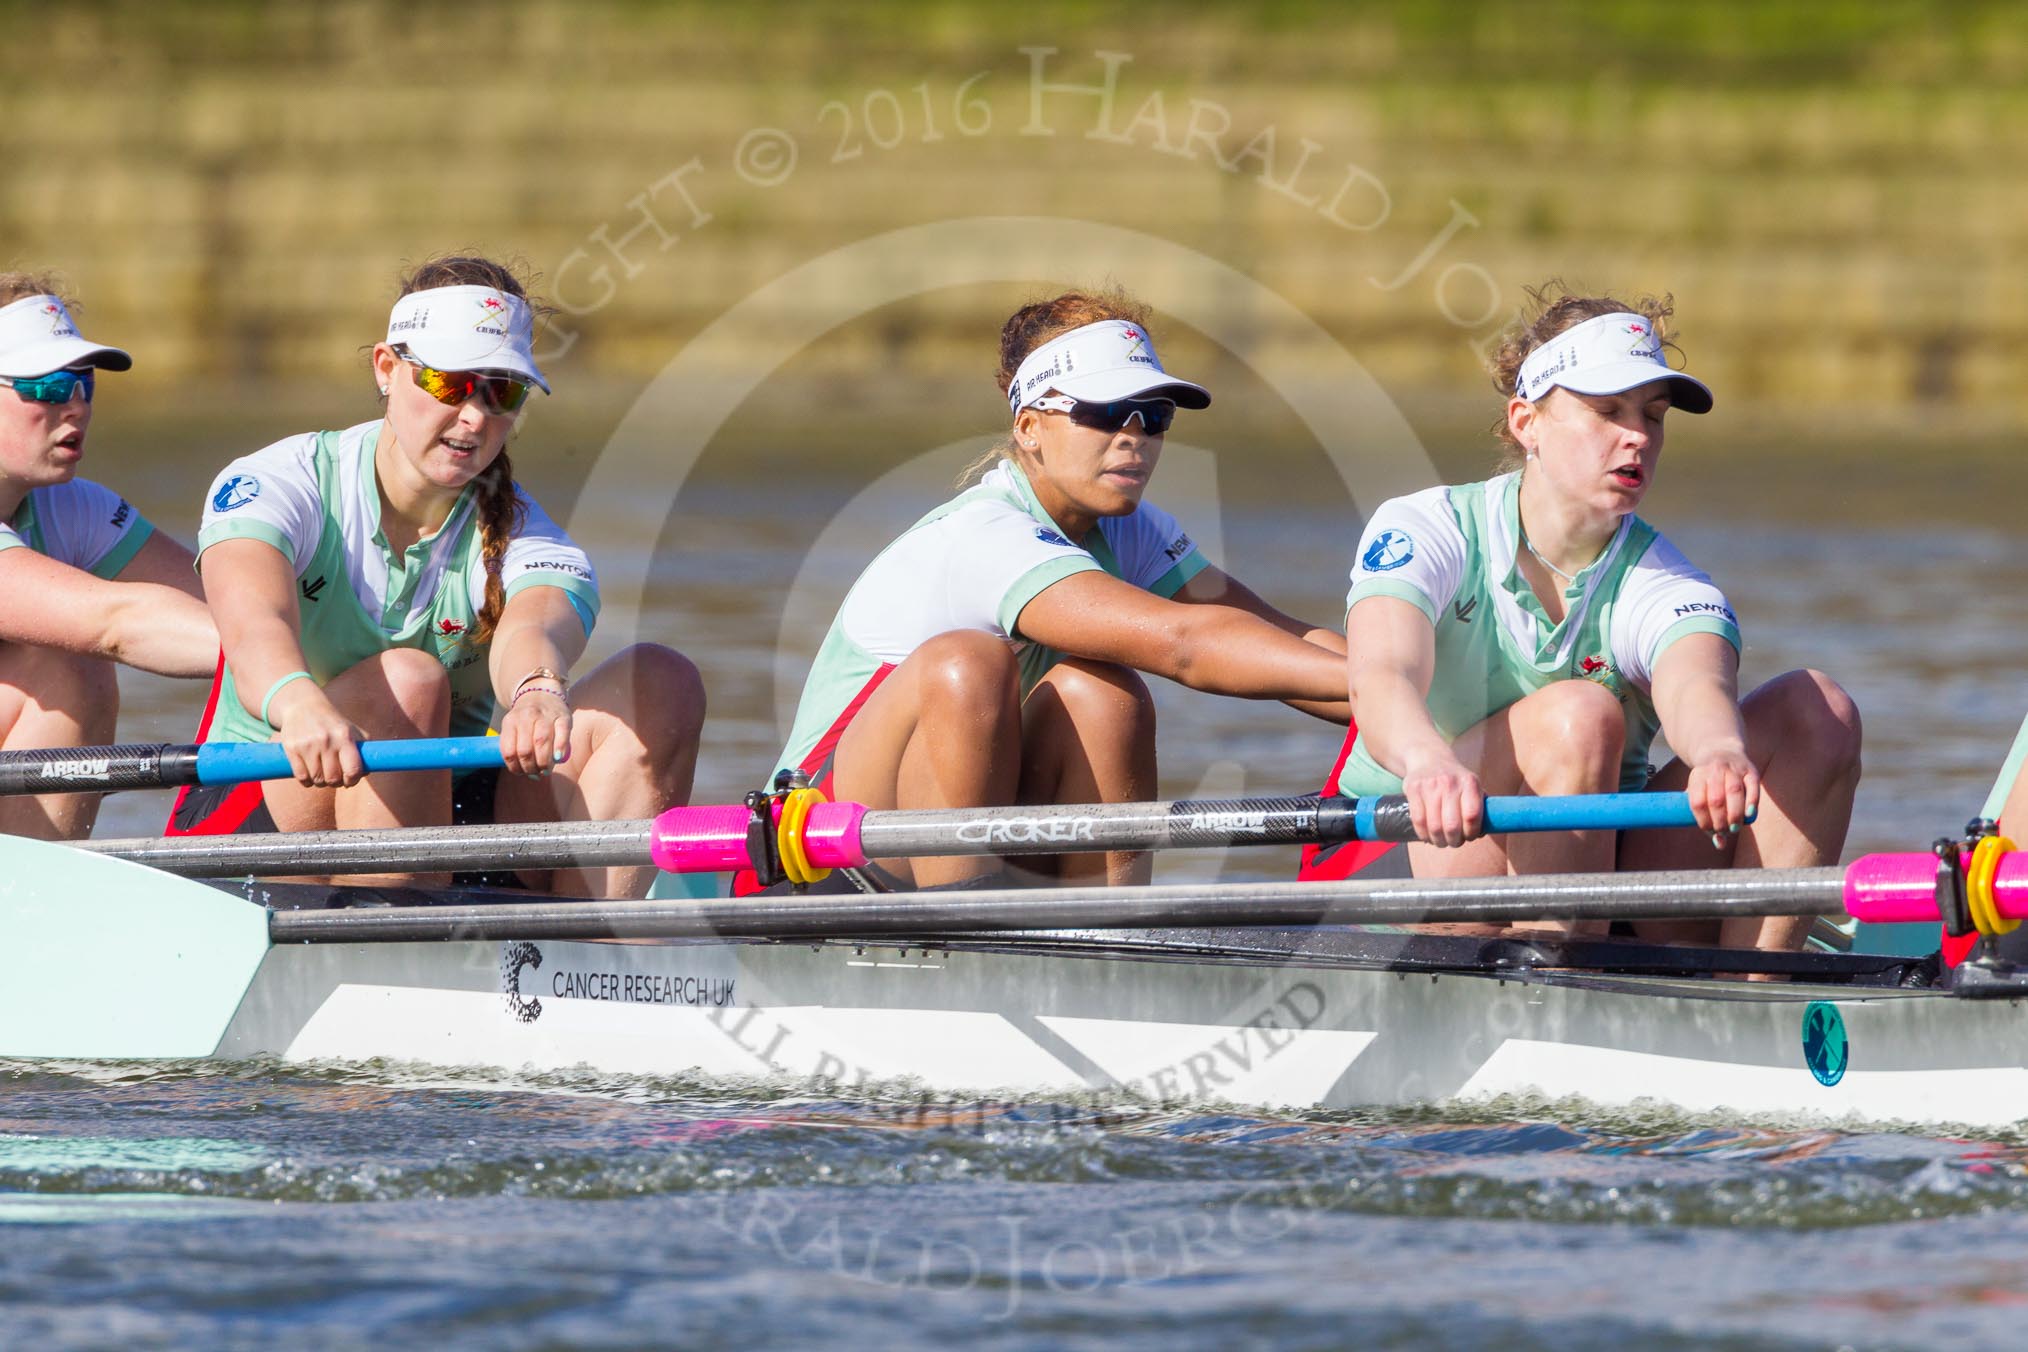 The Boat Race season 2016 -  The Cancer Research Women's Boat Race.
River Thames between Putney Bridge and Mortlake,
London SW15,

United Kingdom,
on 27 March 2016 at 14:12, image #196